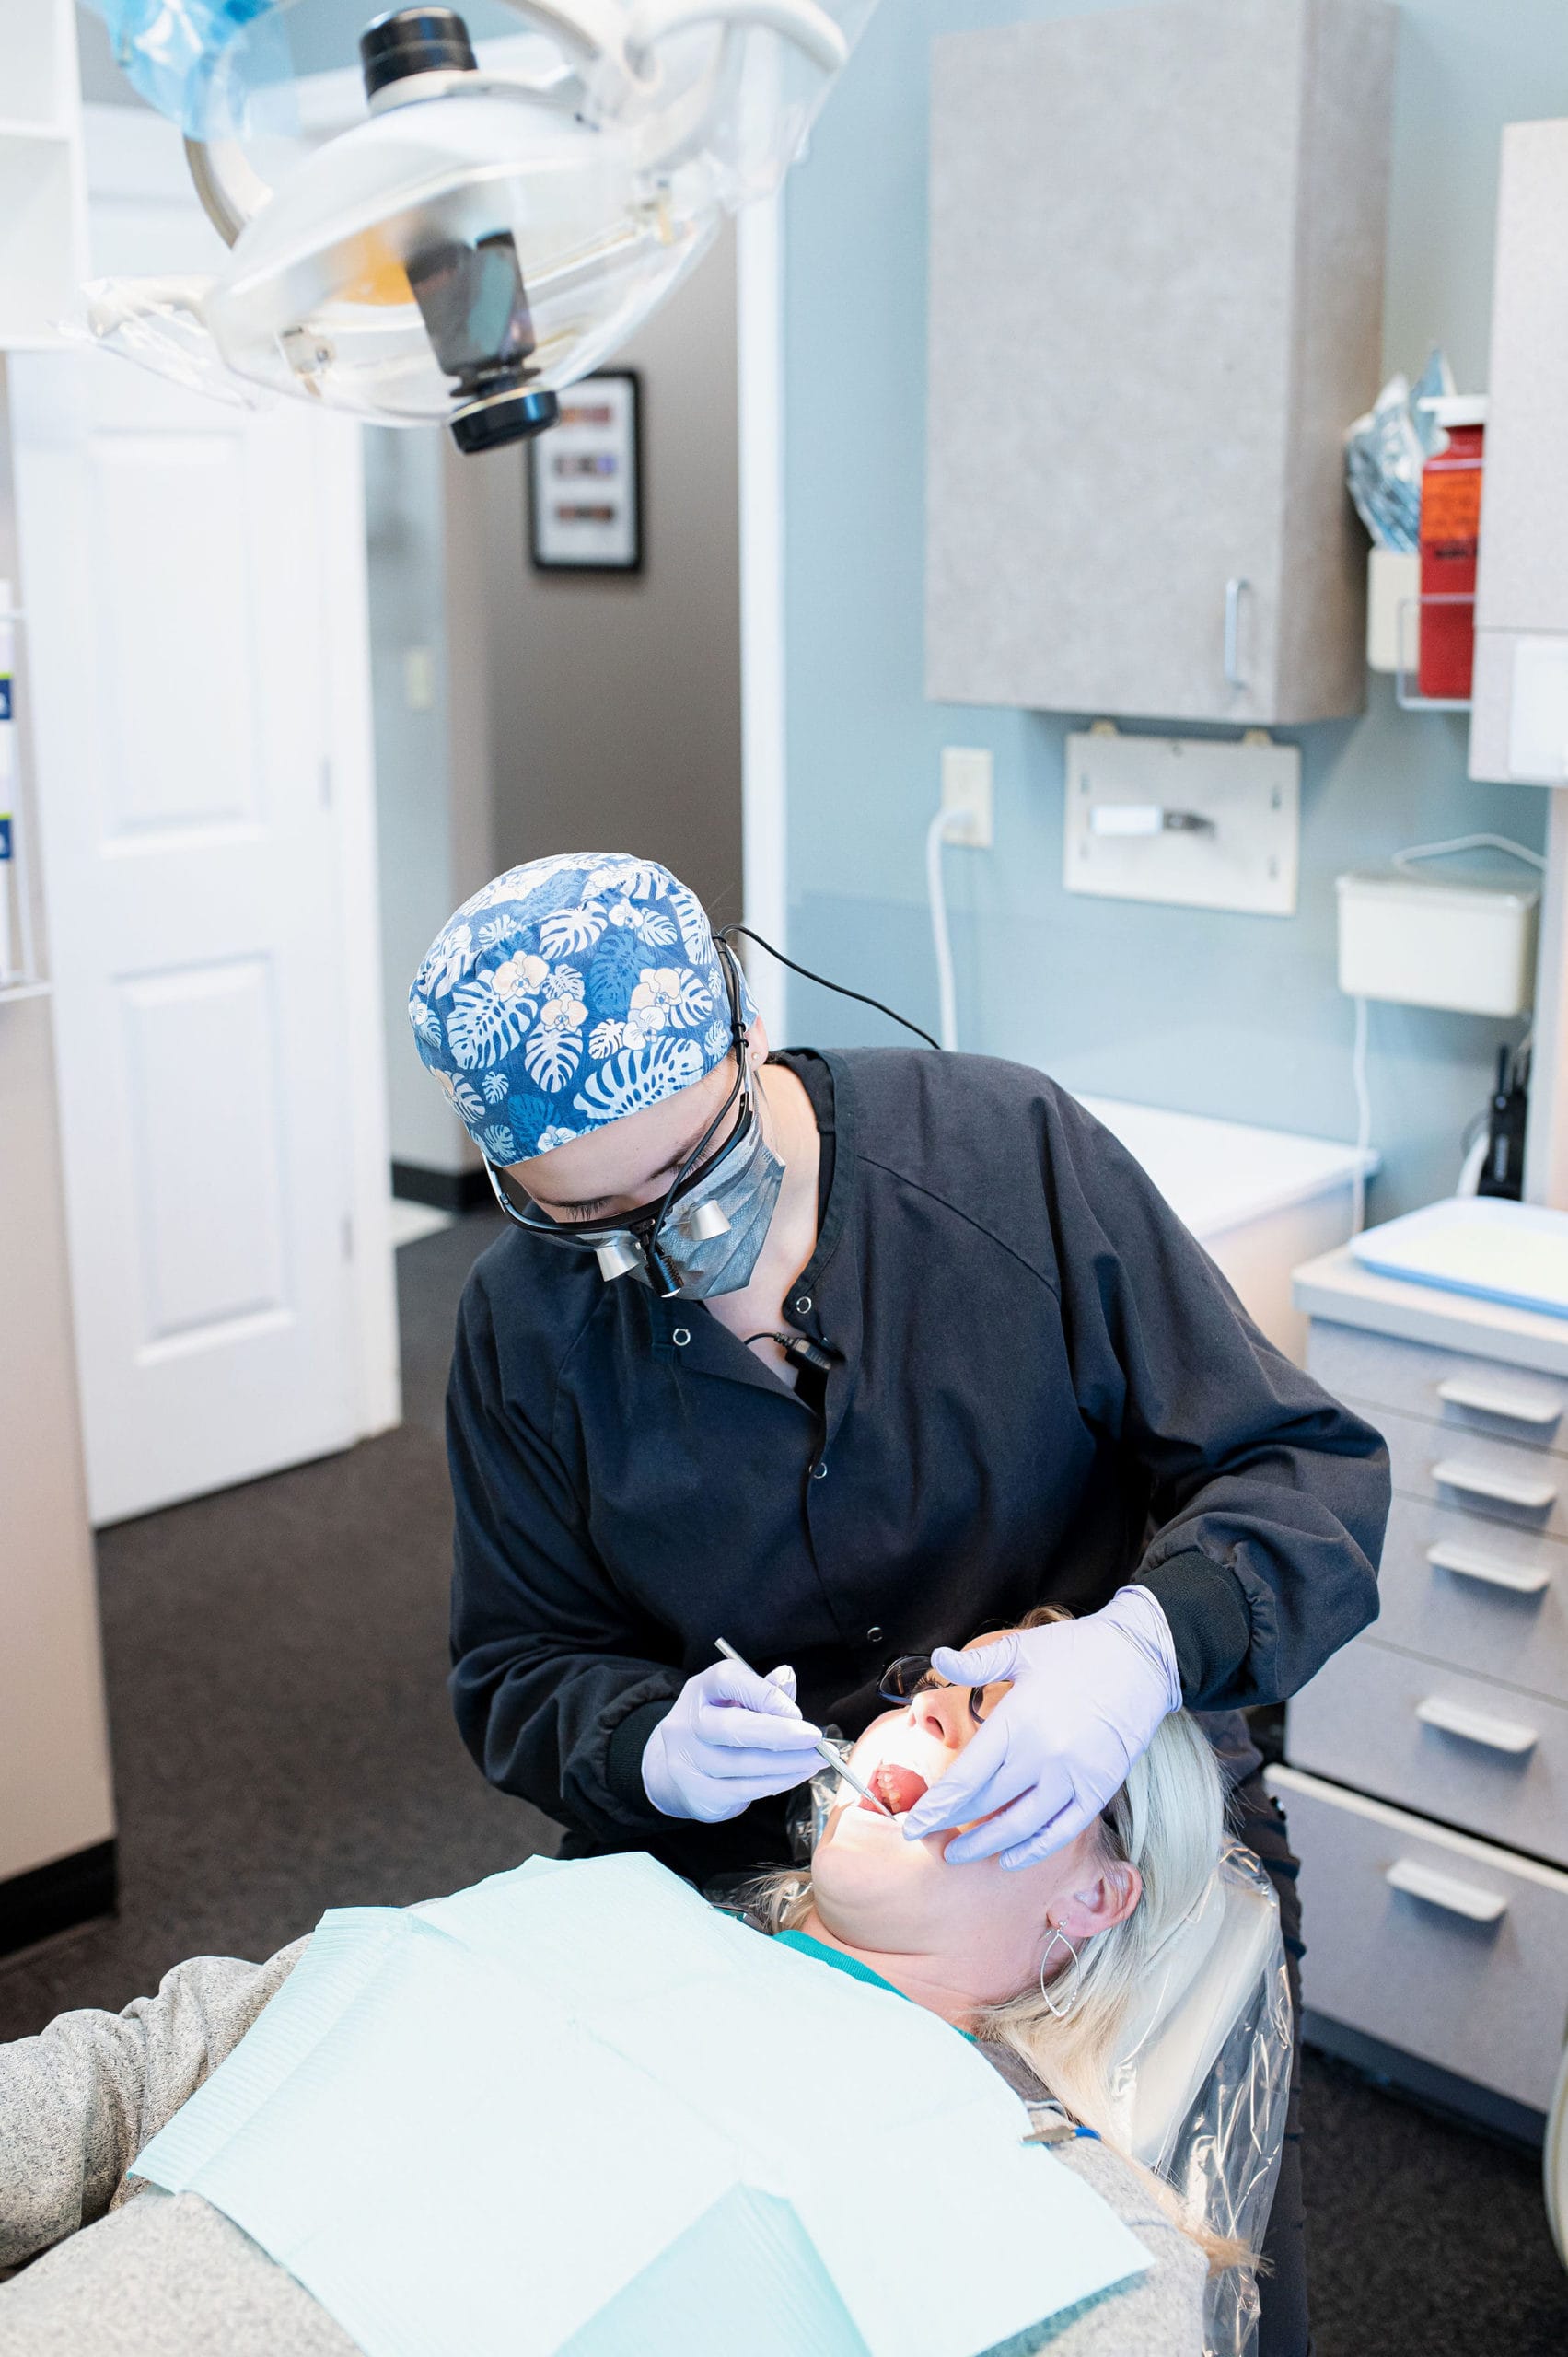 A dental professional wearing a patterned surgical cap and magnifying glasses performs a dental procedure on a patient reclining in a dental chair, with medical equipment visible in the background.